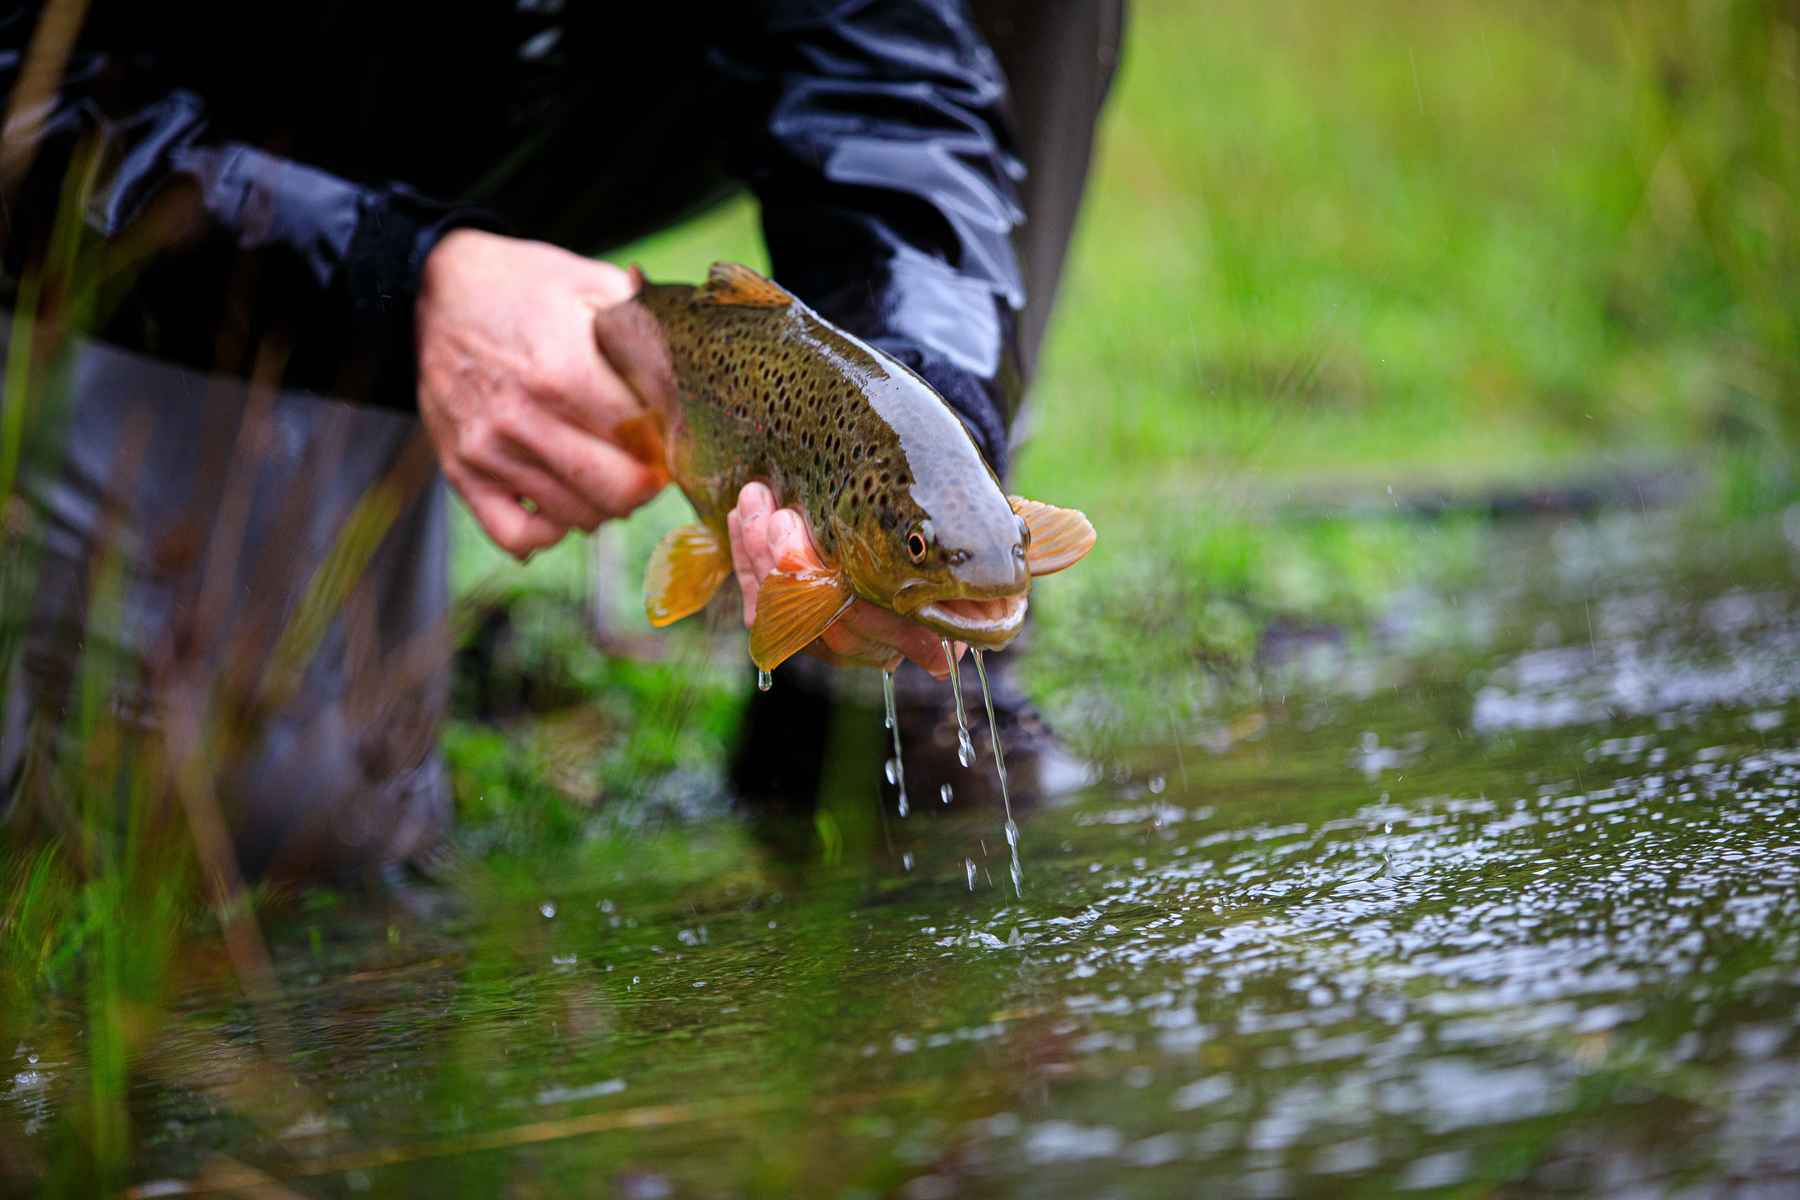 10 Tips to Make Stillwater Fly Fishing More Fun 